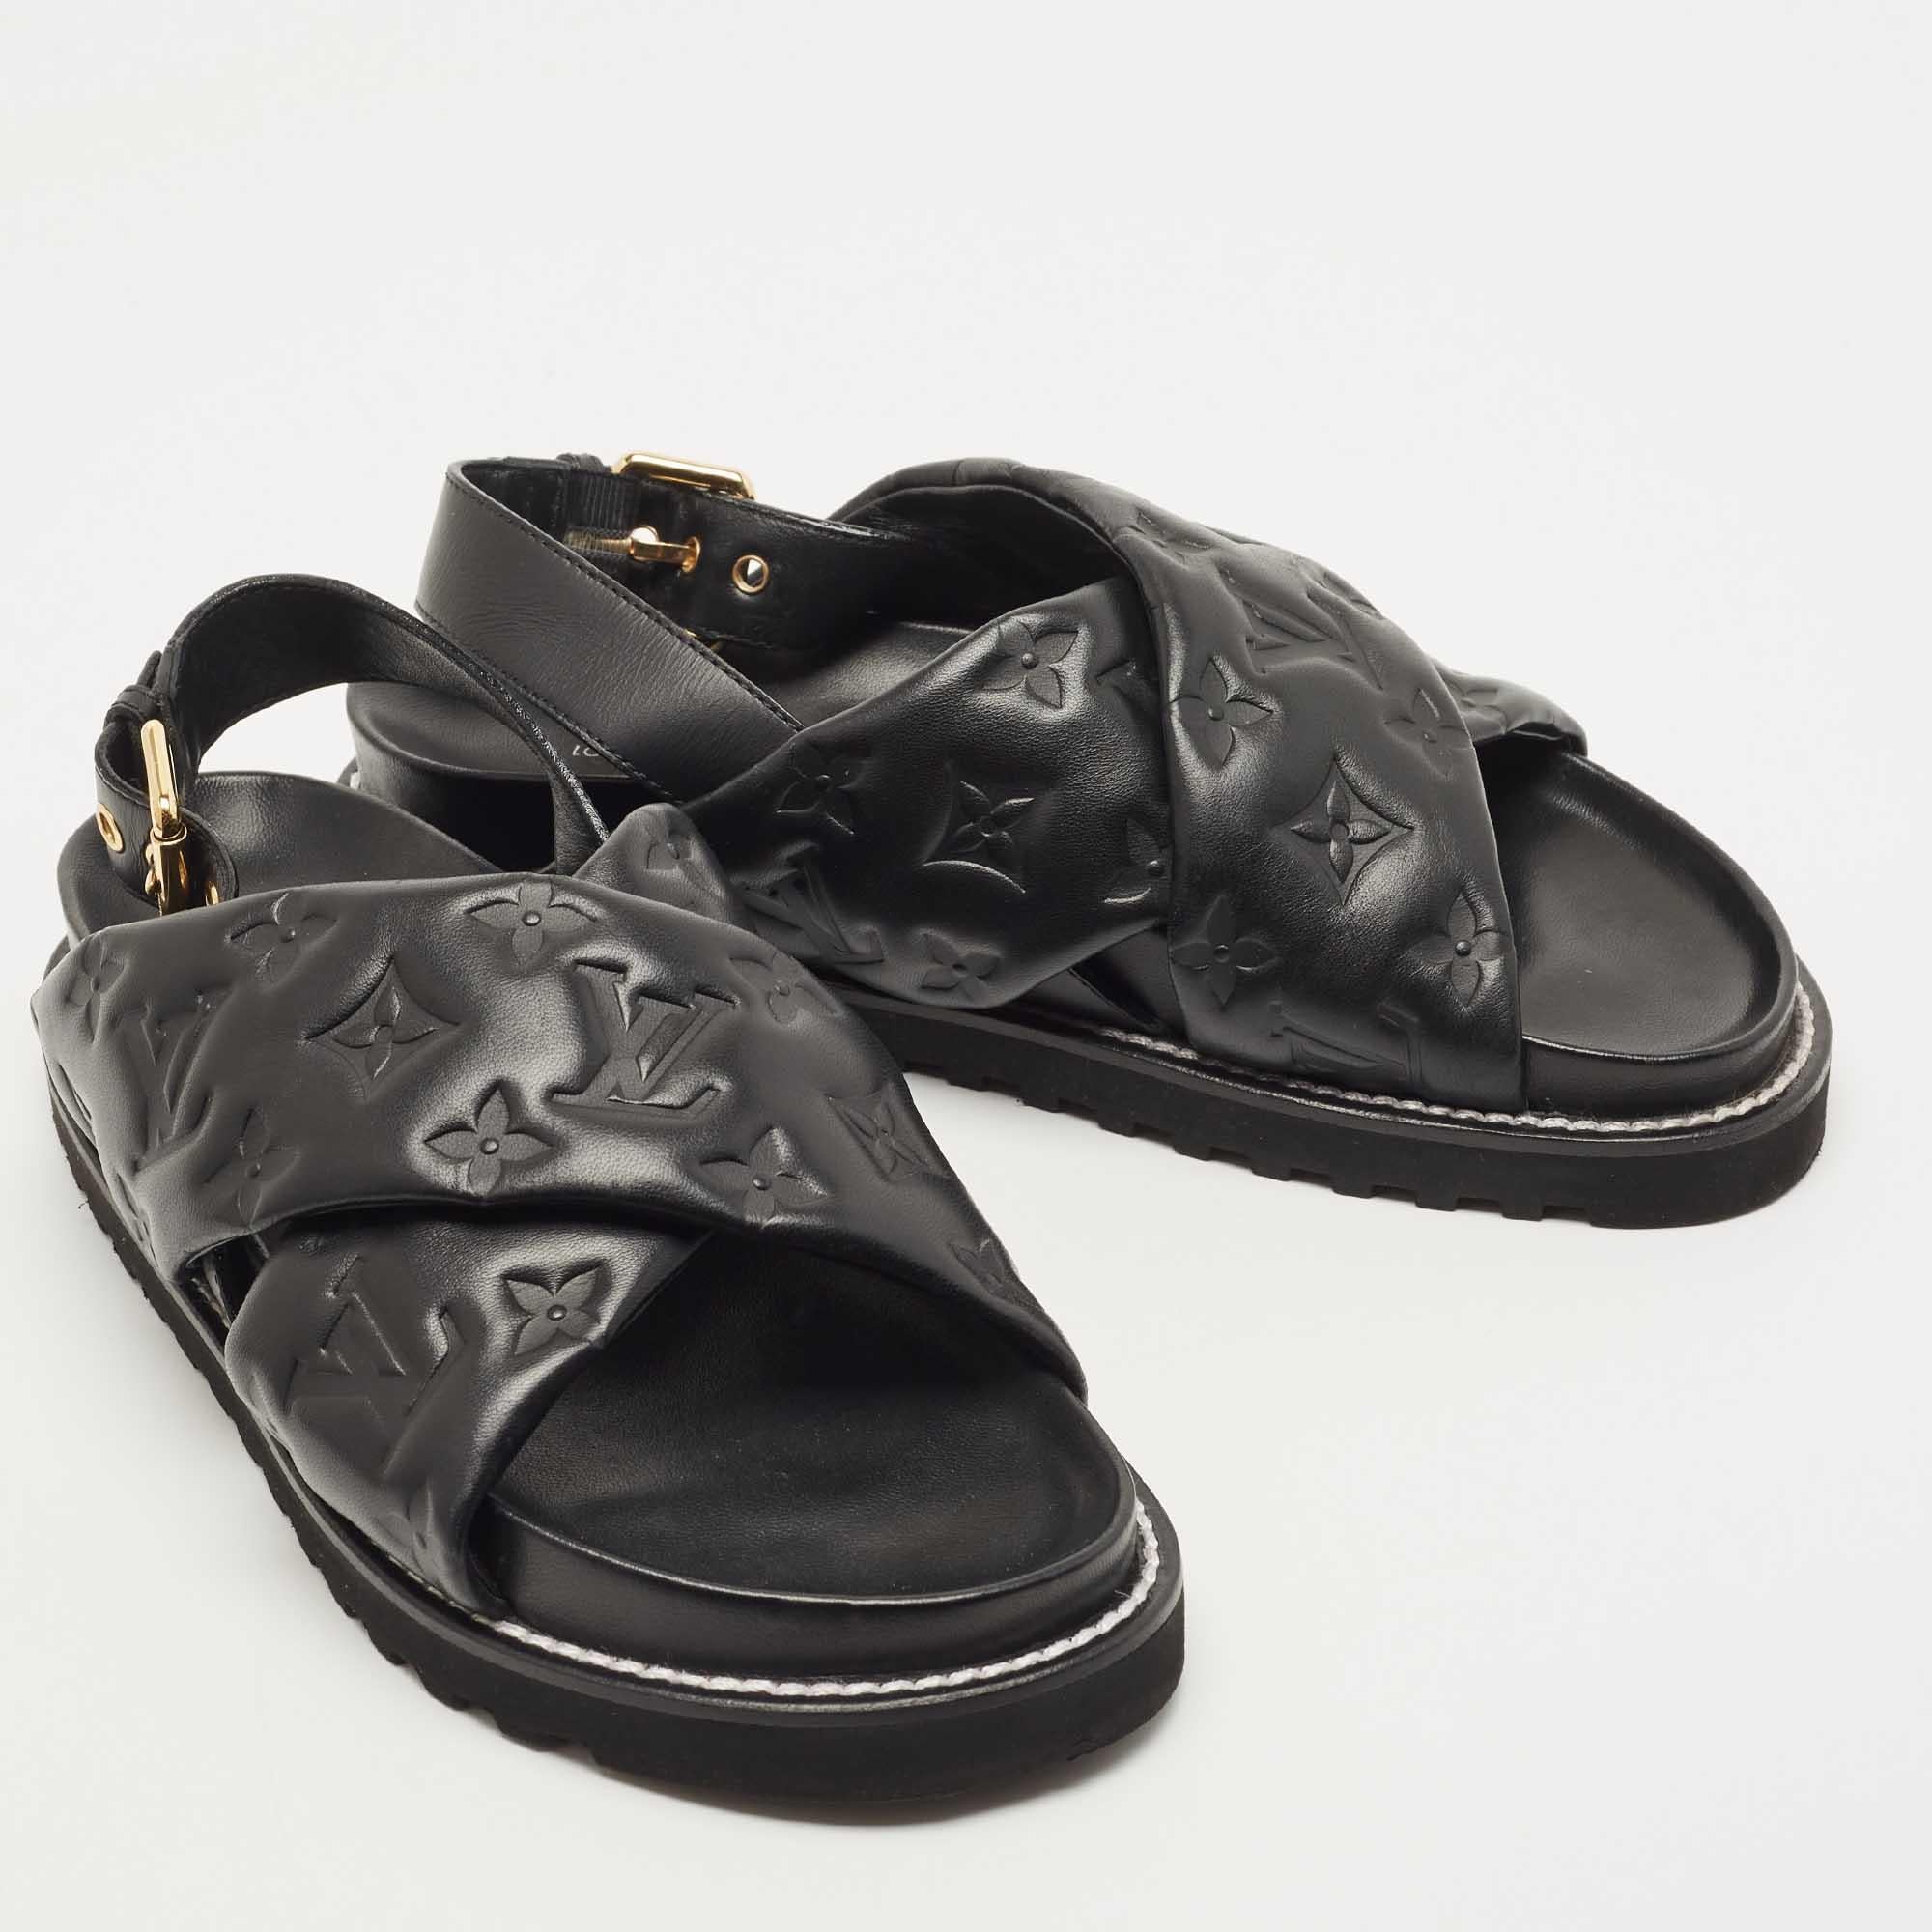 Louis Vuitton Black Monogram Embossed Leather Paseo Flat Sandals Size 39 1